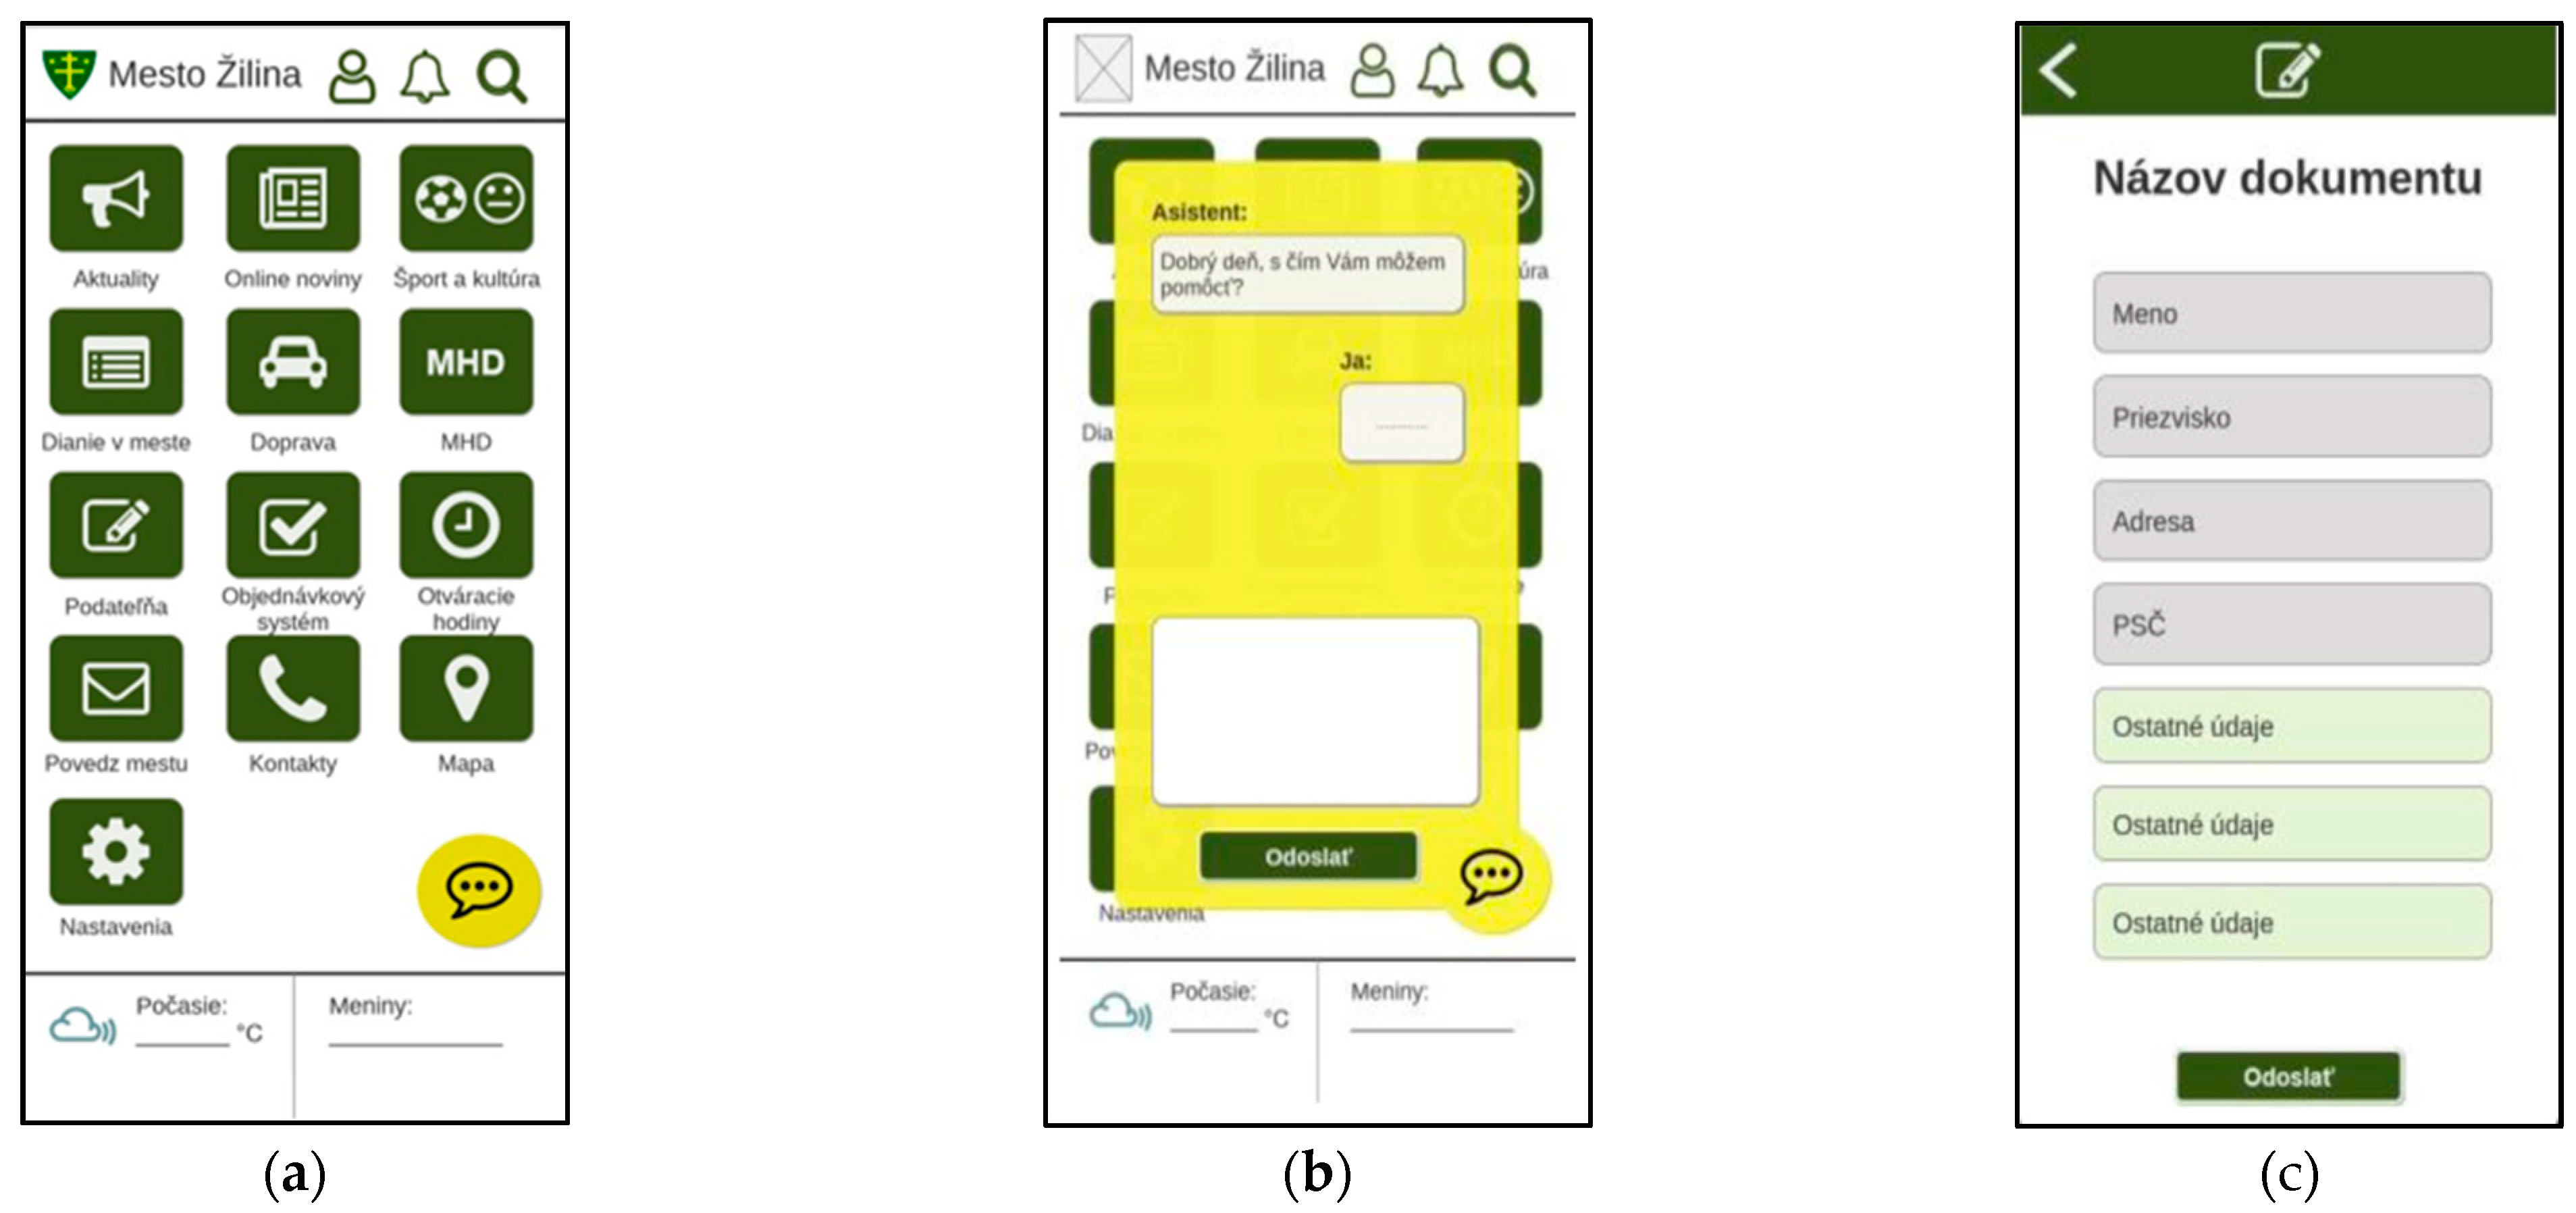 Sustainability | Free Full-Text | The Concept of a Smart City Communication  in the Form of an Urban Mobile Application